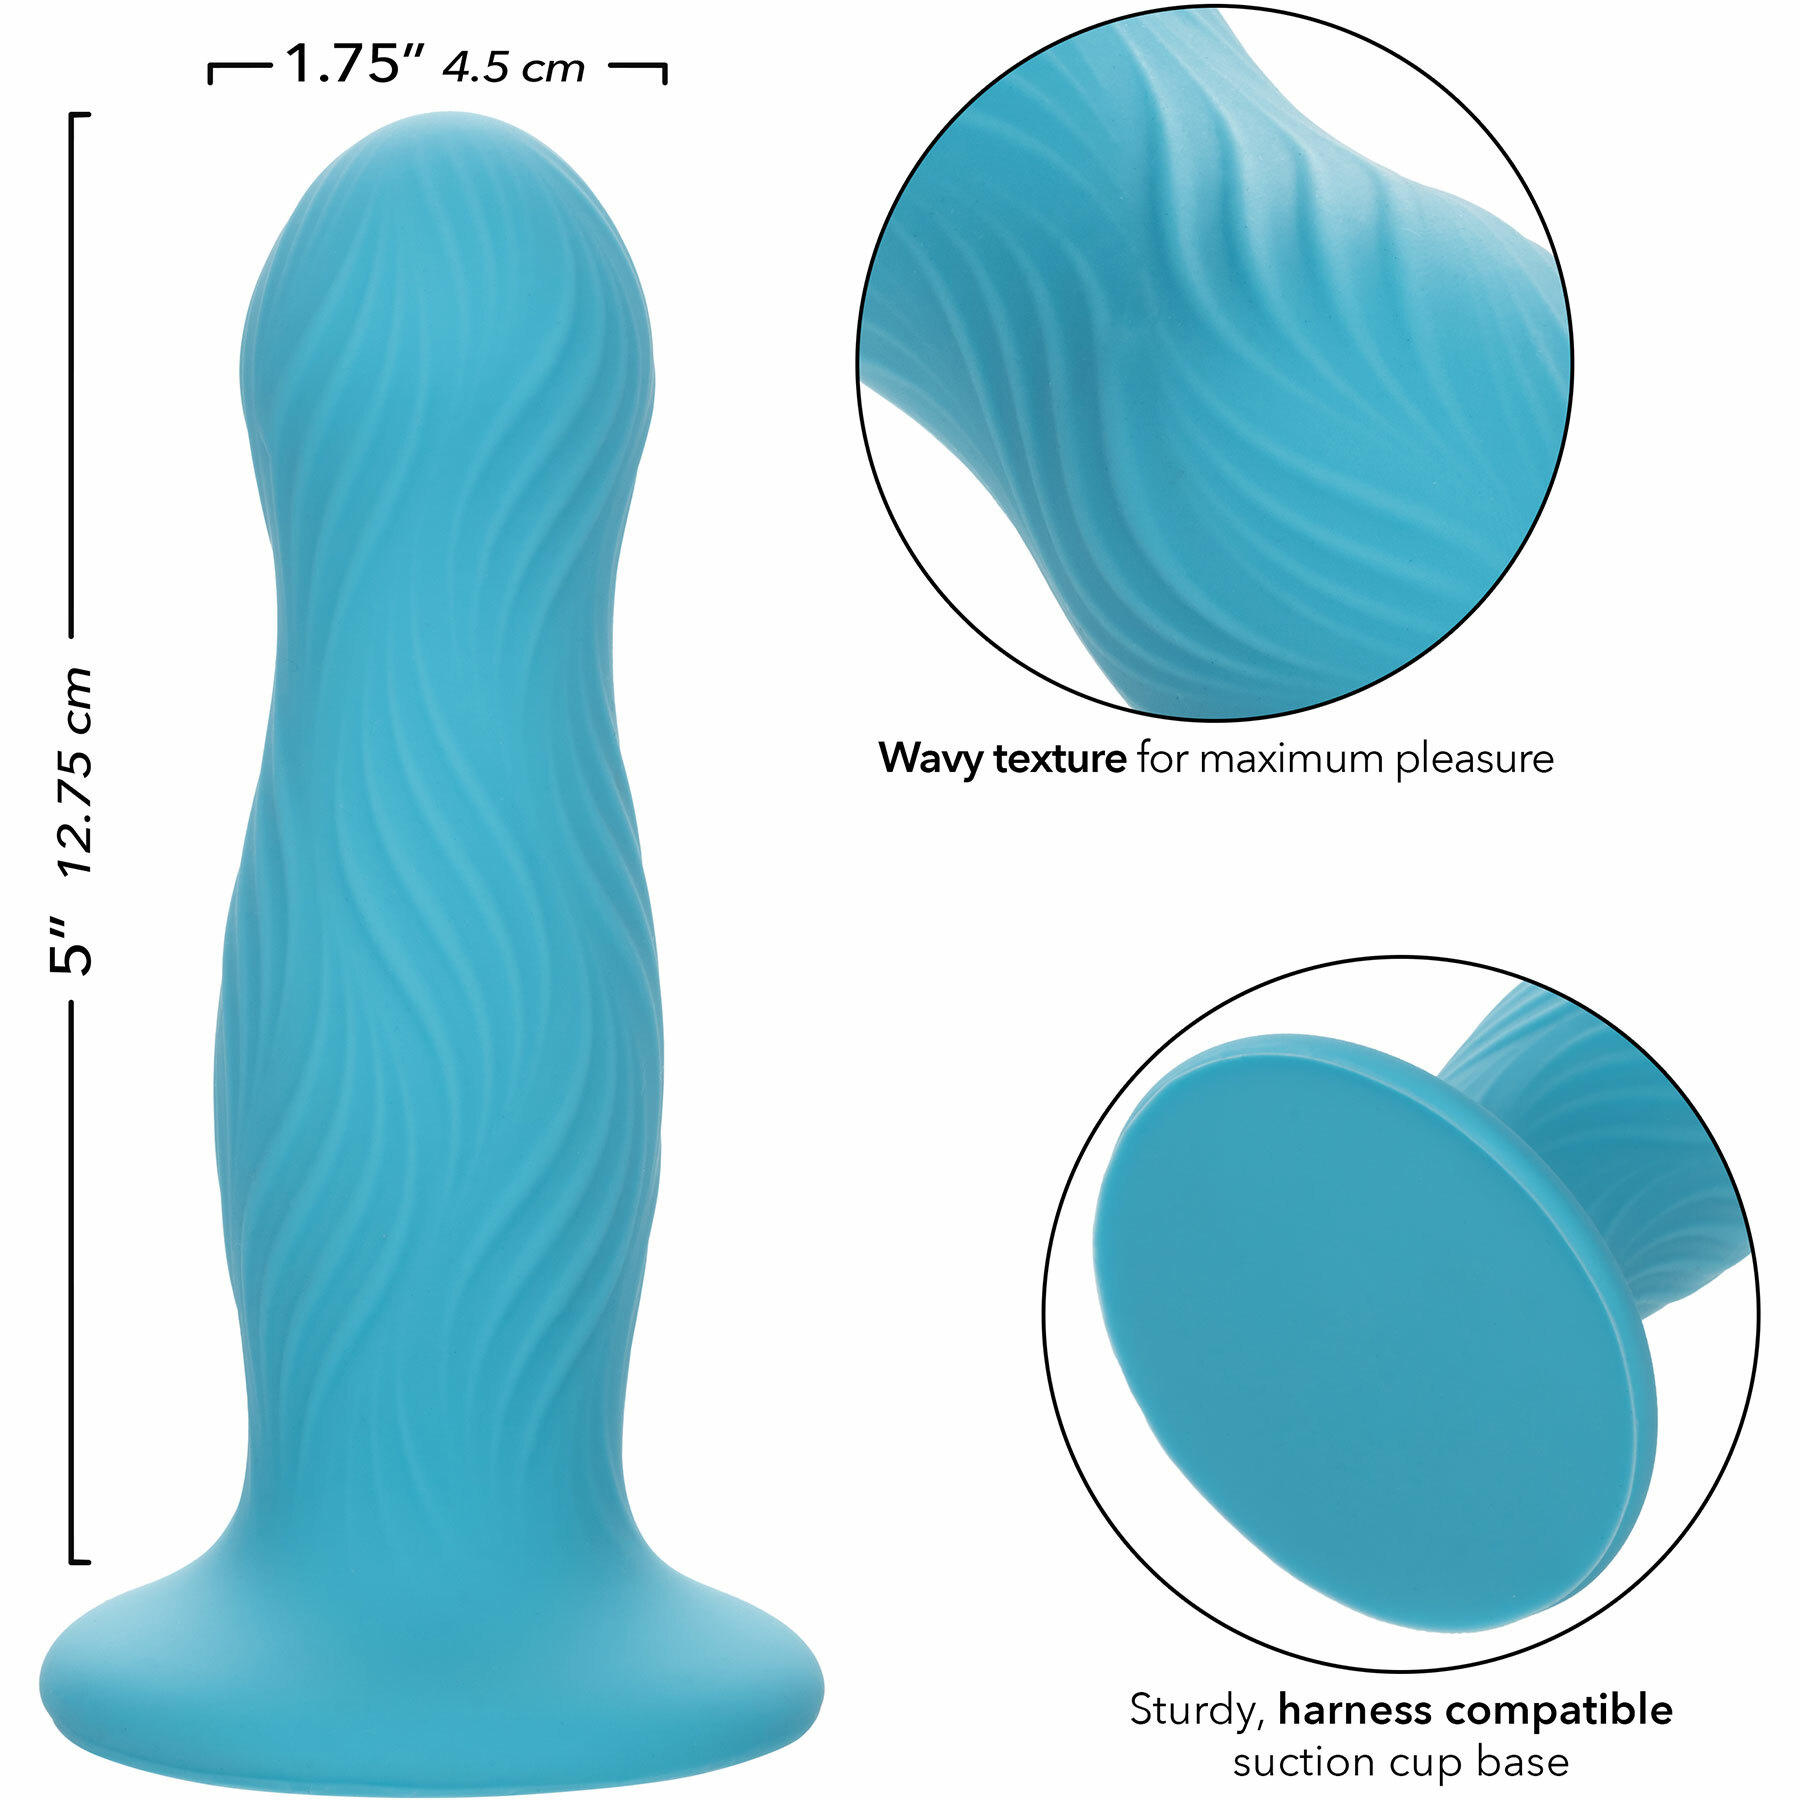 Wave Rider Swell 5" Silicone Suction Cup Dildo - Measurements